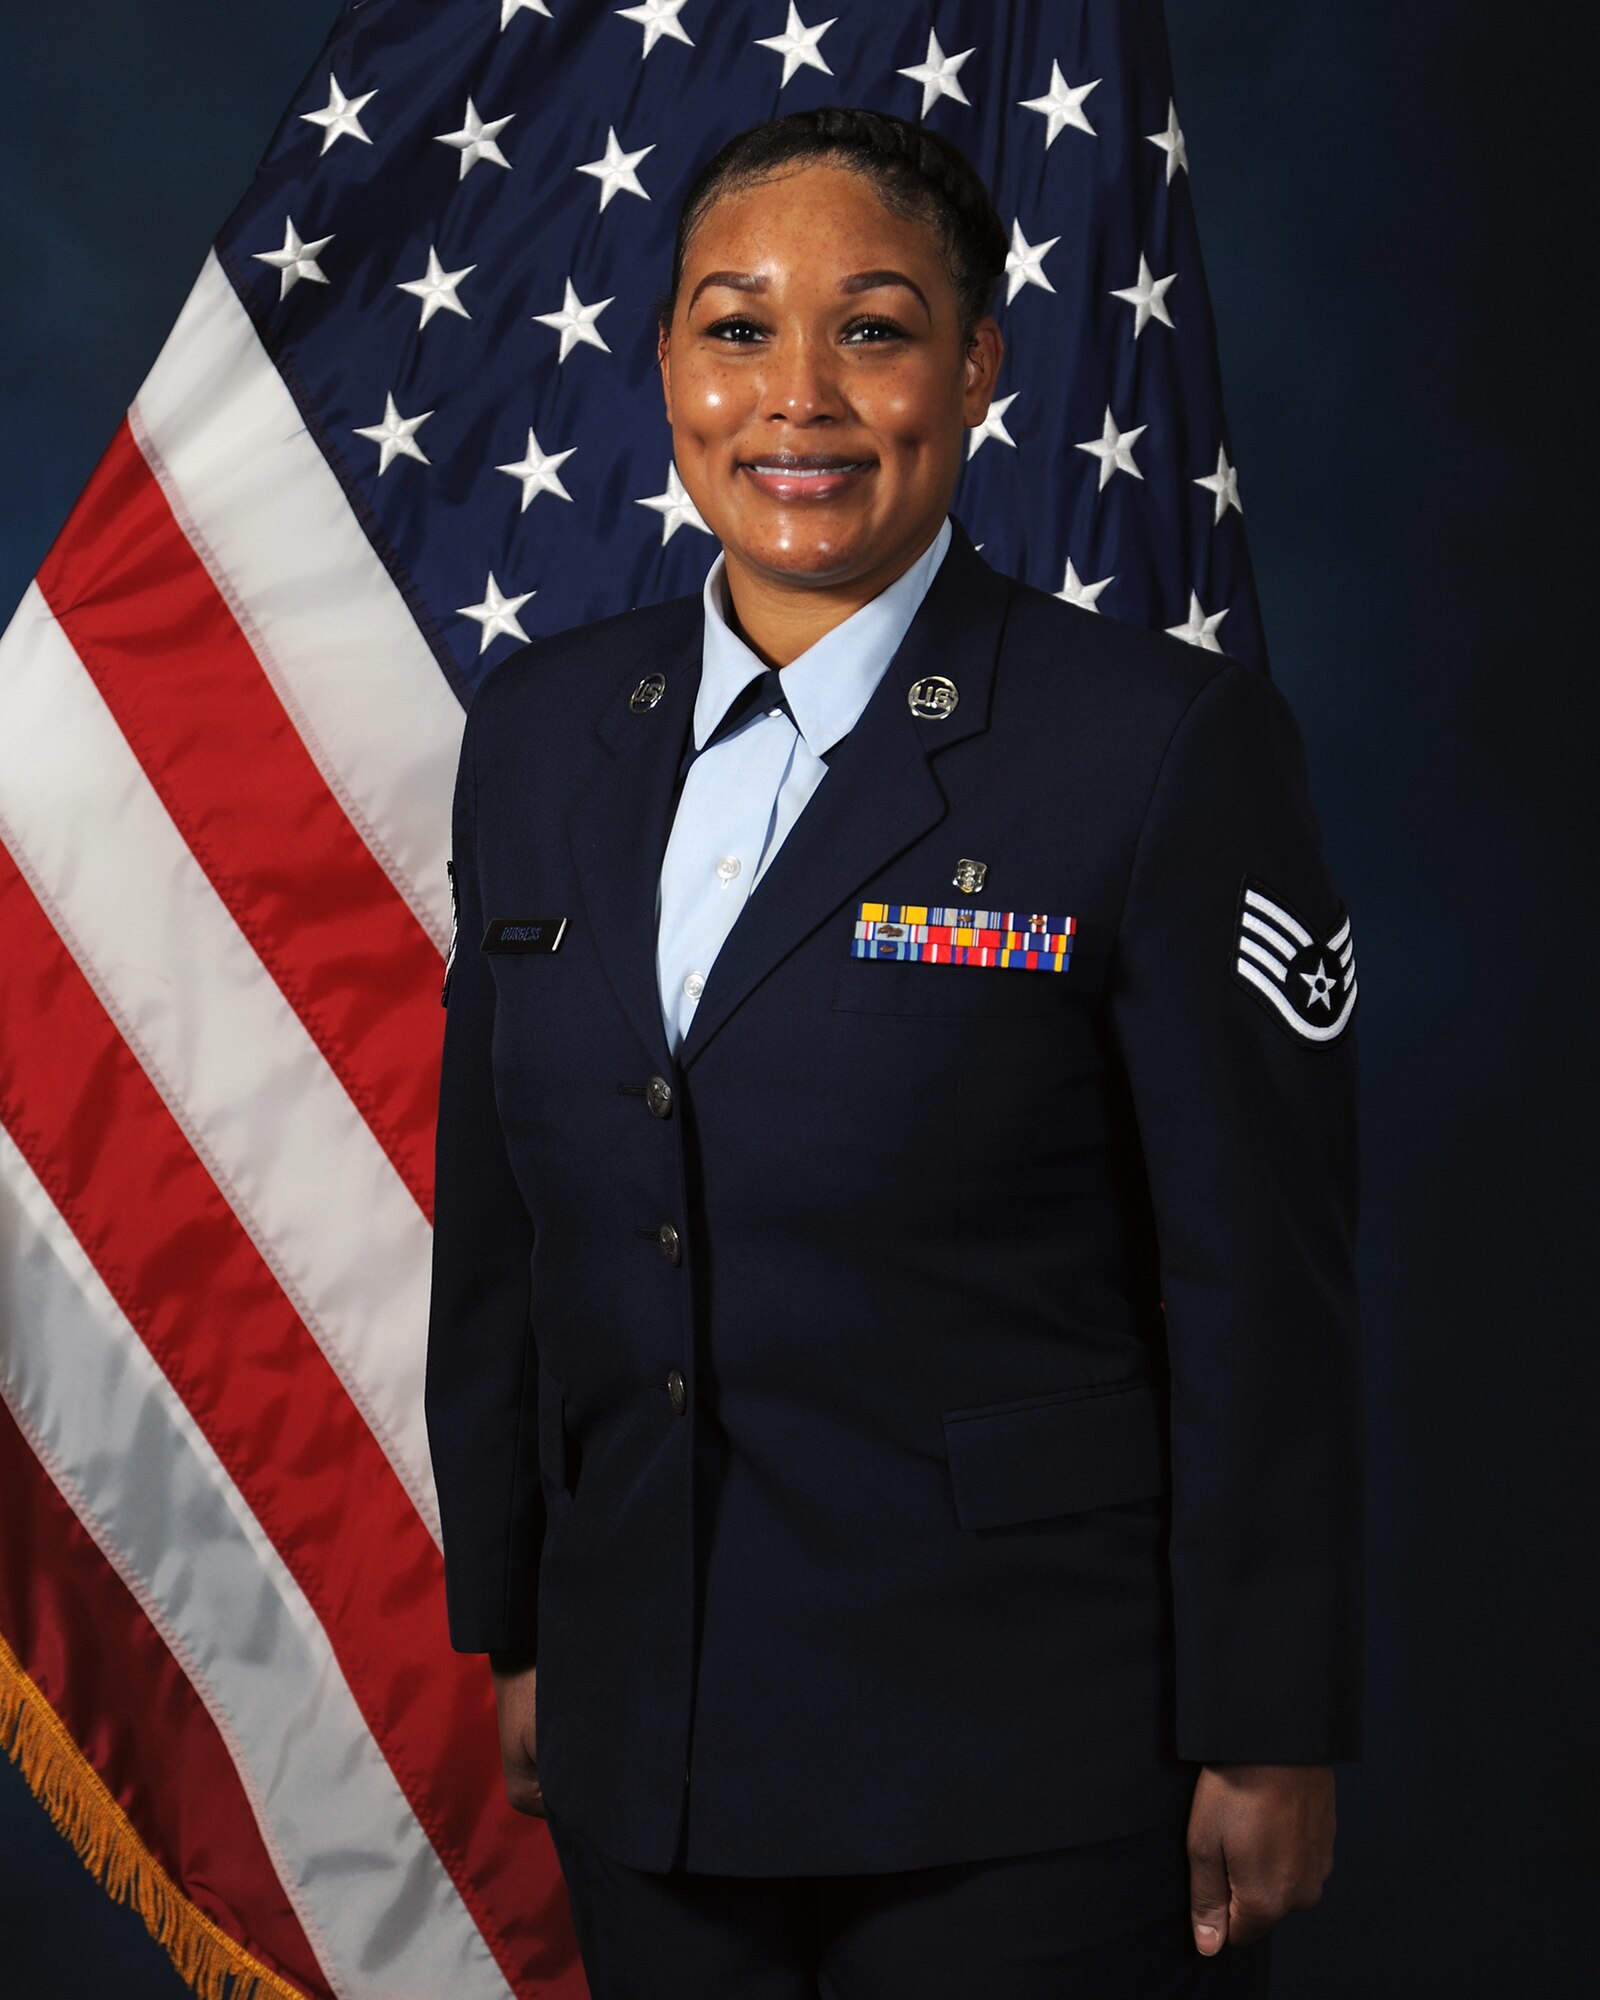 Tech. Sgt. Lateshia Burgess (pictured as Staff Sgt.) will represent the Air Force as a Fiesta 2021 Air Force ambassador. Fiesta 2021 is scheduled to take place April 15-25 in San Antonio, Texas.